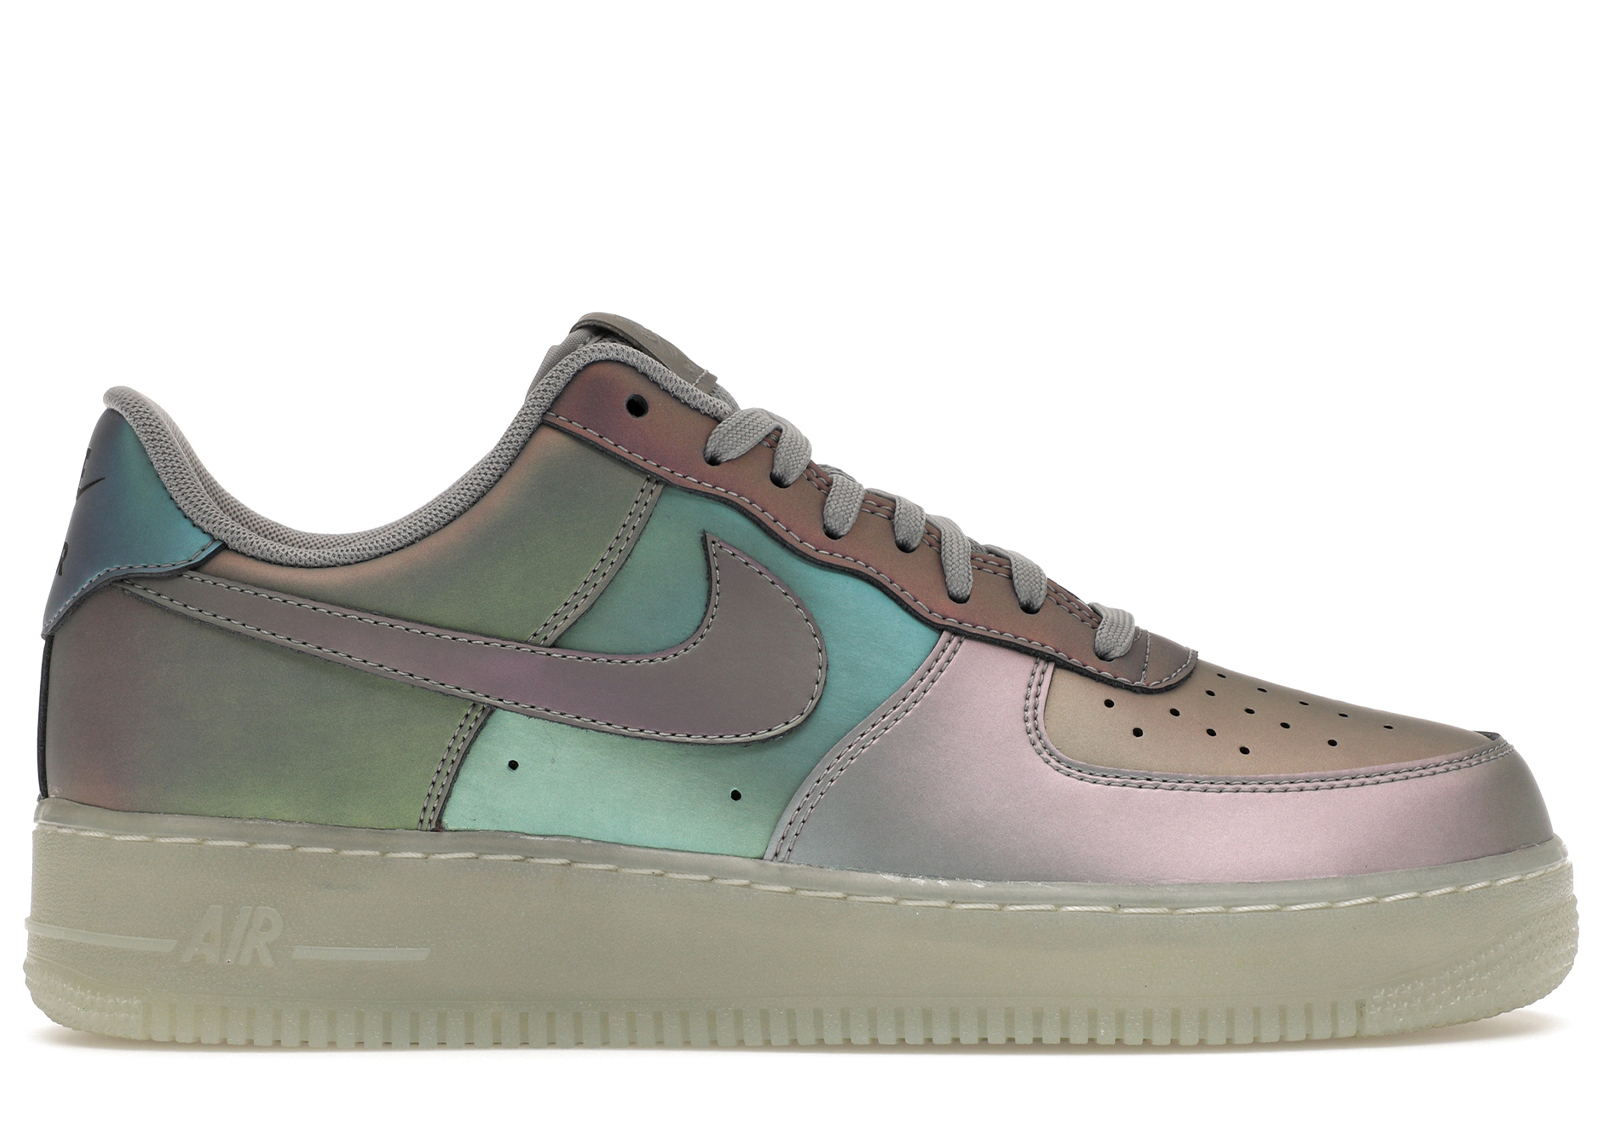 Nike Air Force 1 Low Iridescent